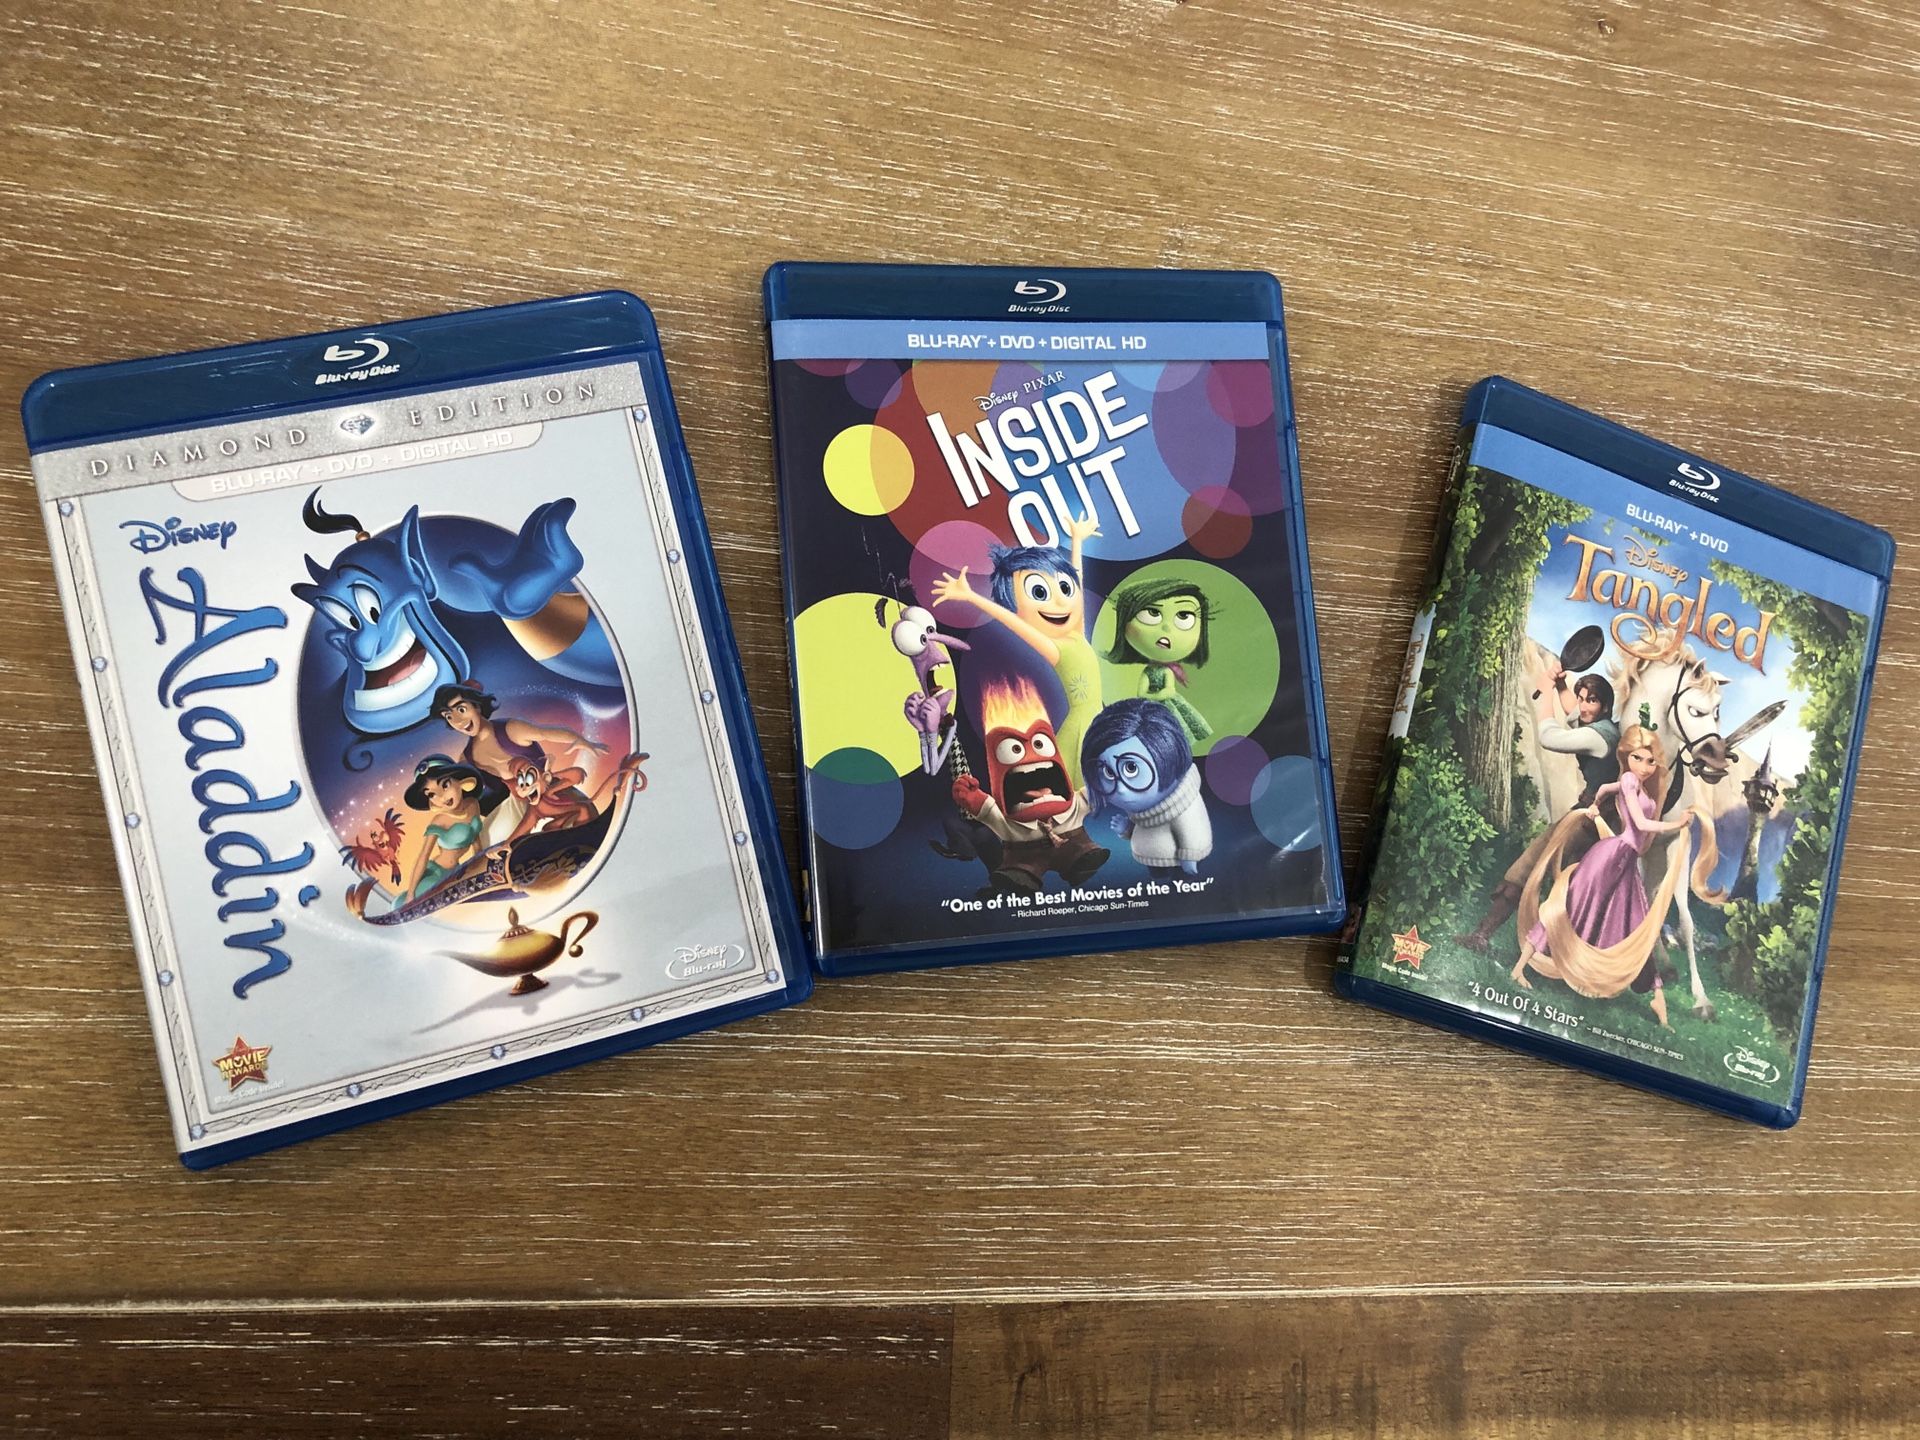 Aladdin, Inside Out and Tangled blue ray dvds